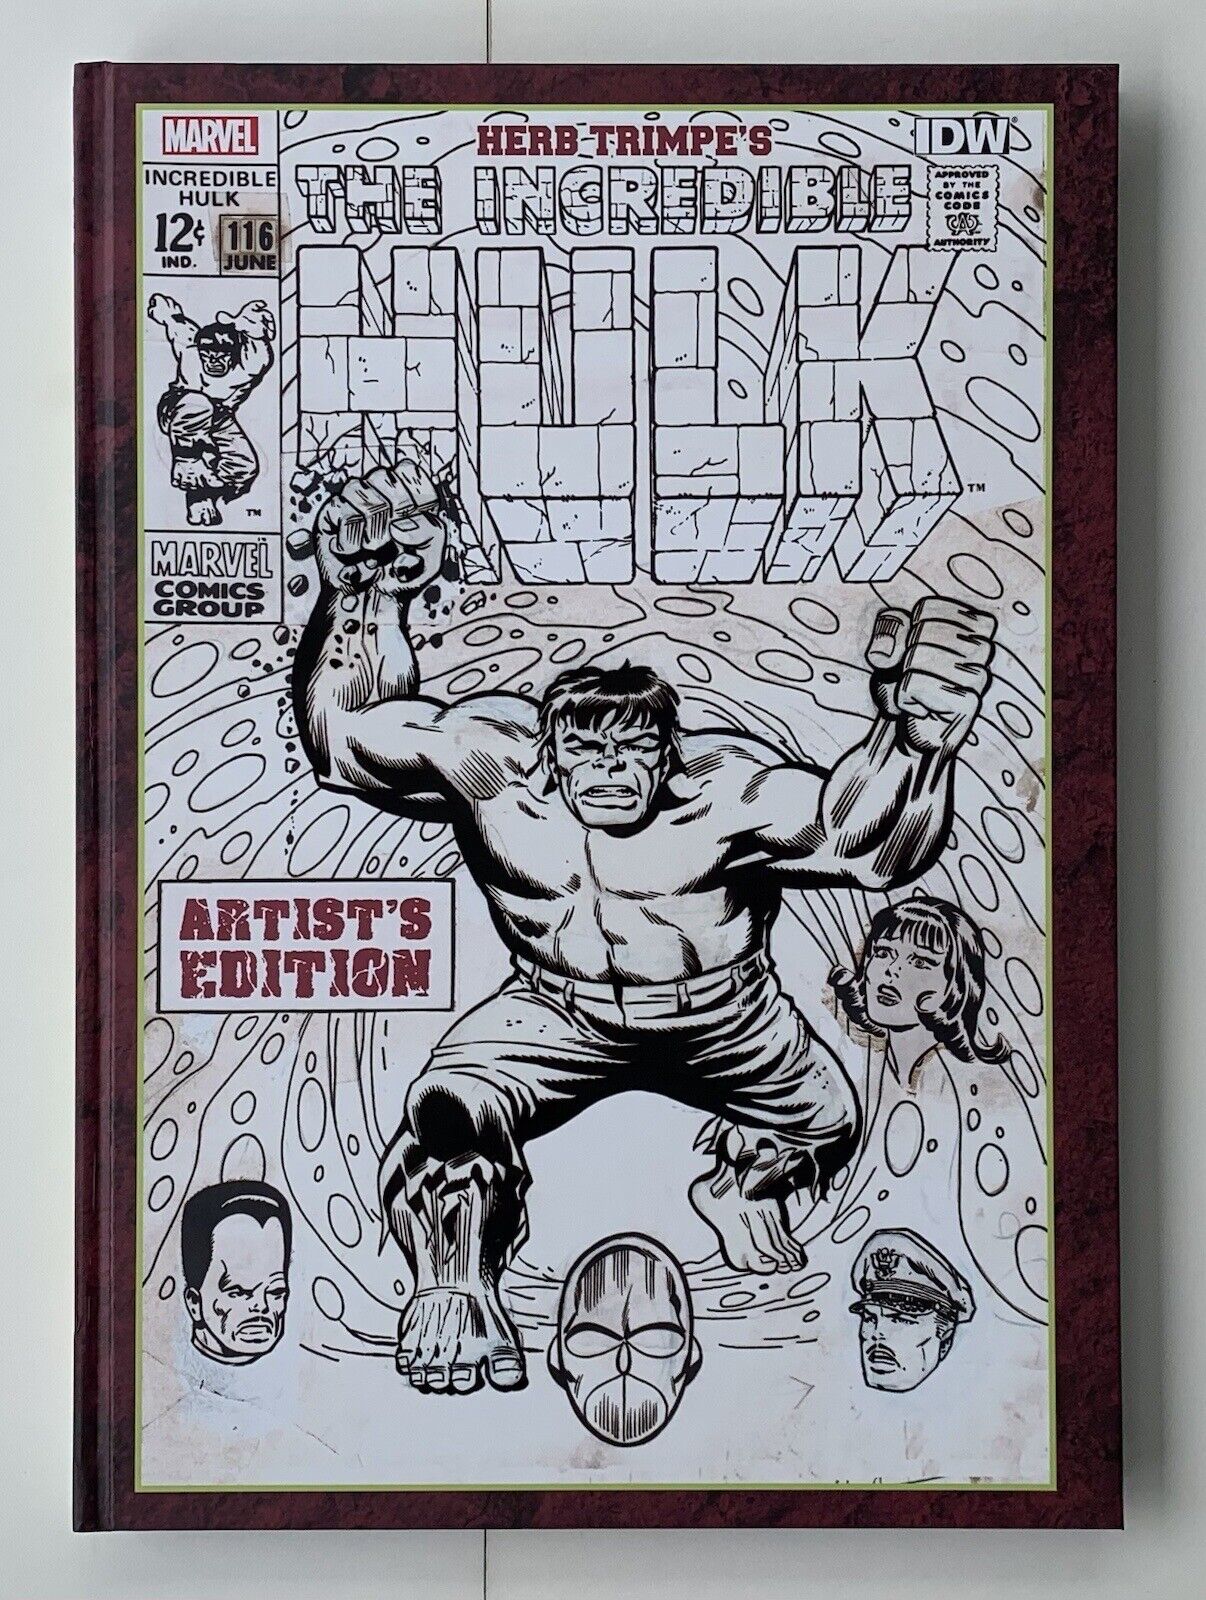 Herb Trimpe’s Incredible Hulk Artist’s Edition HC New IDW Marvel Hardcover